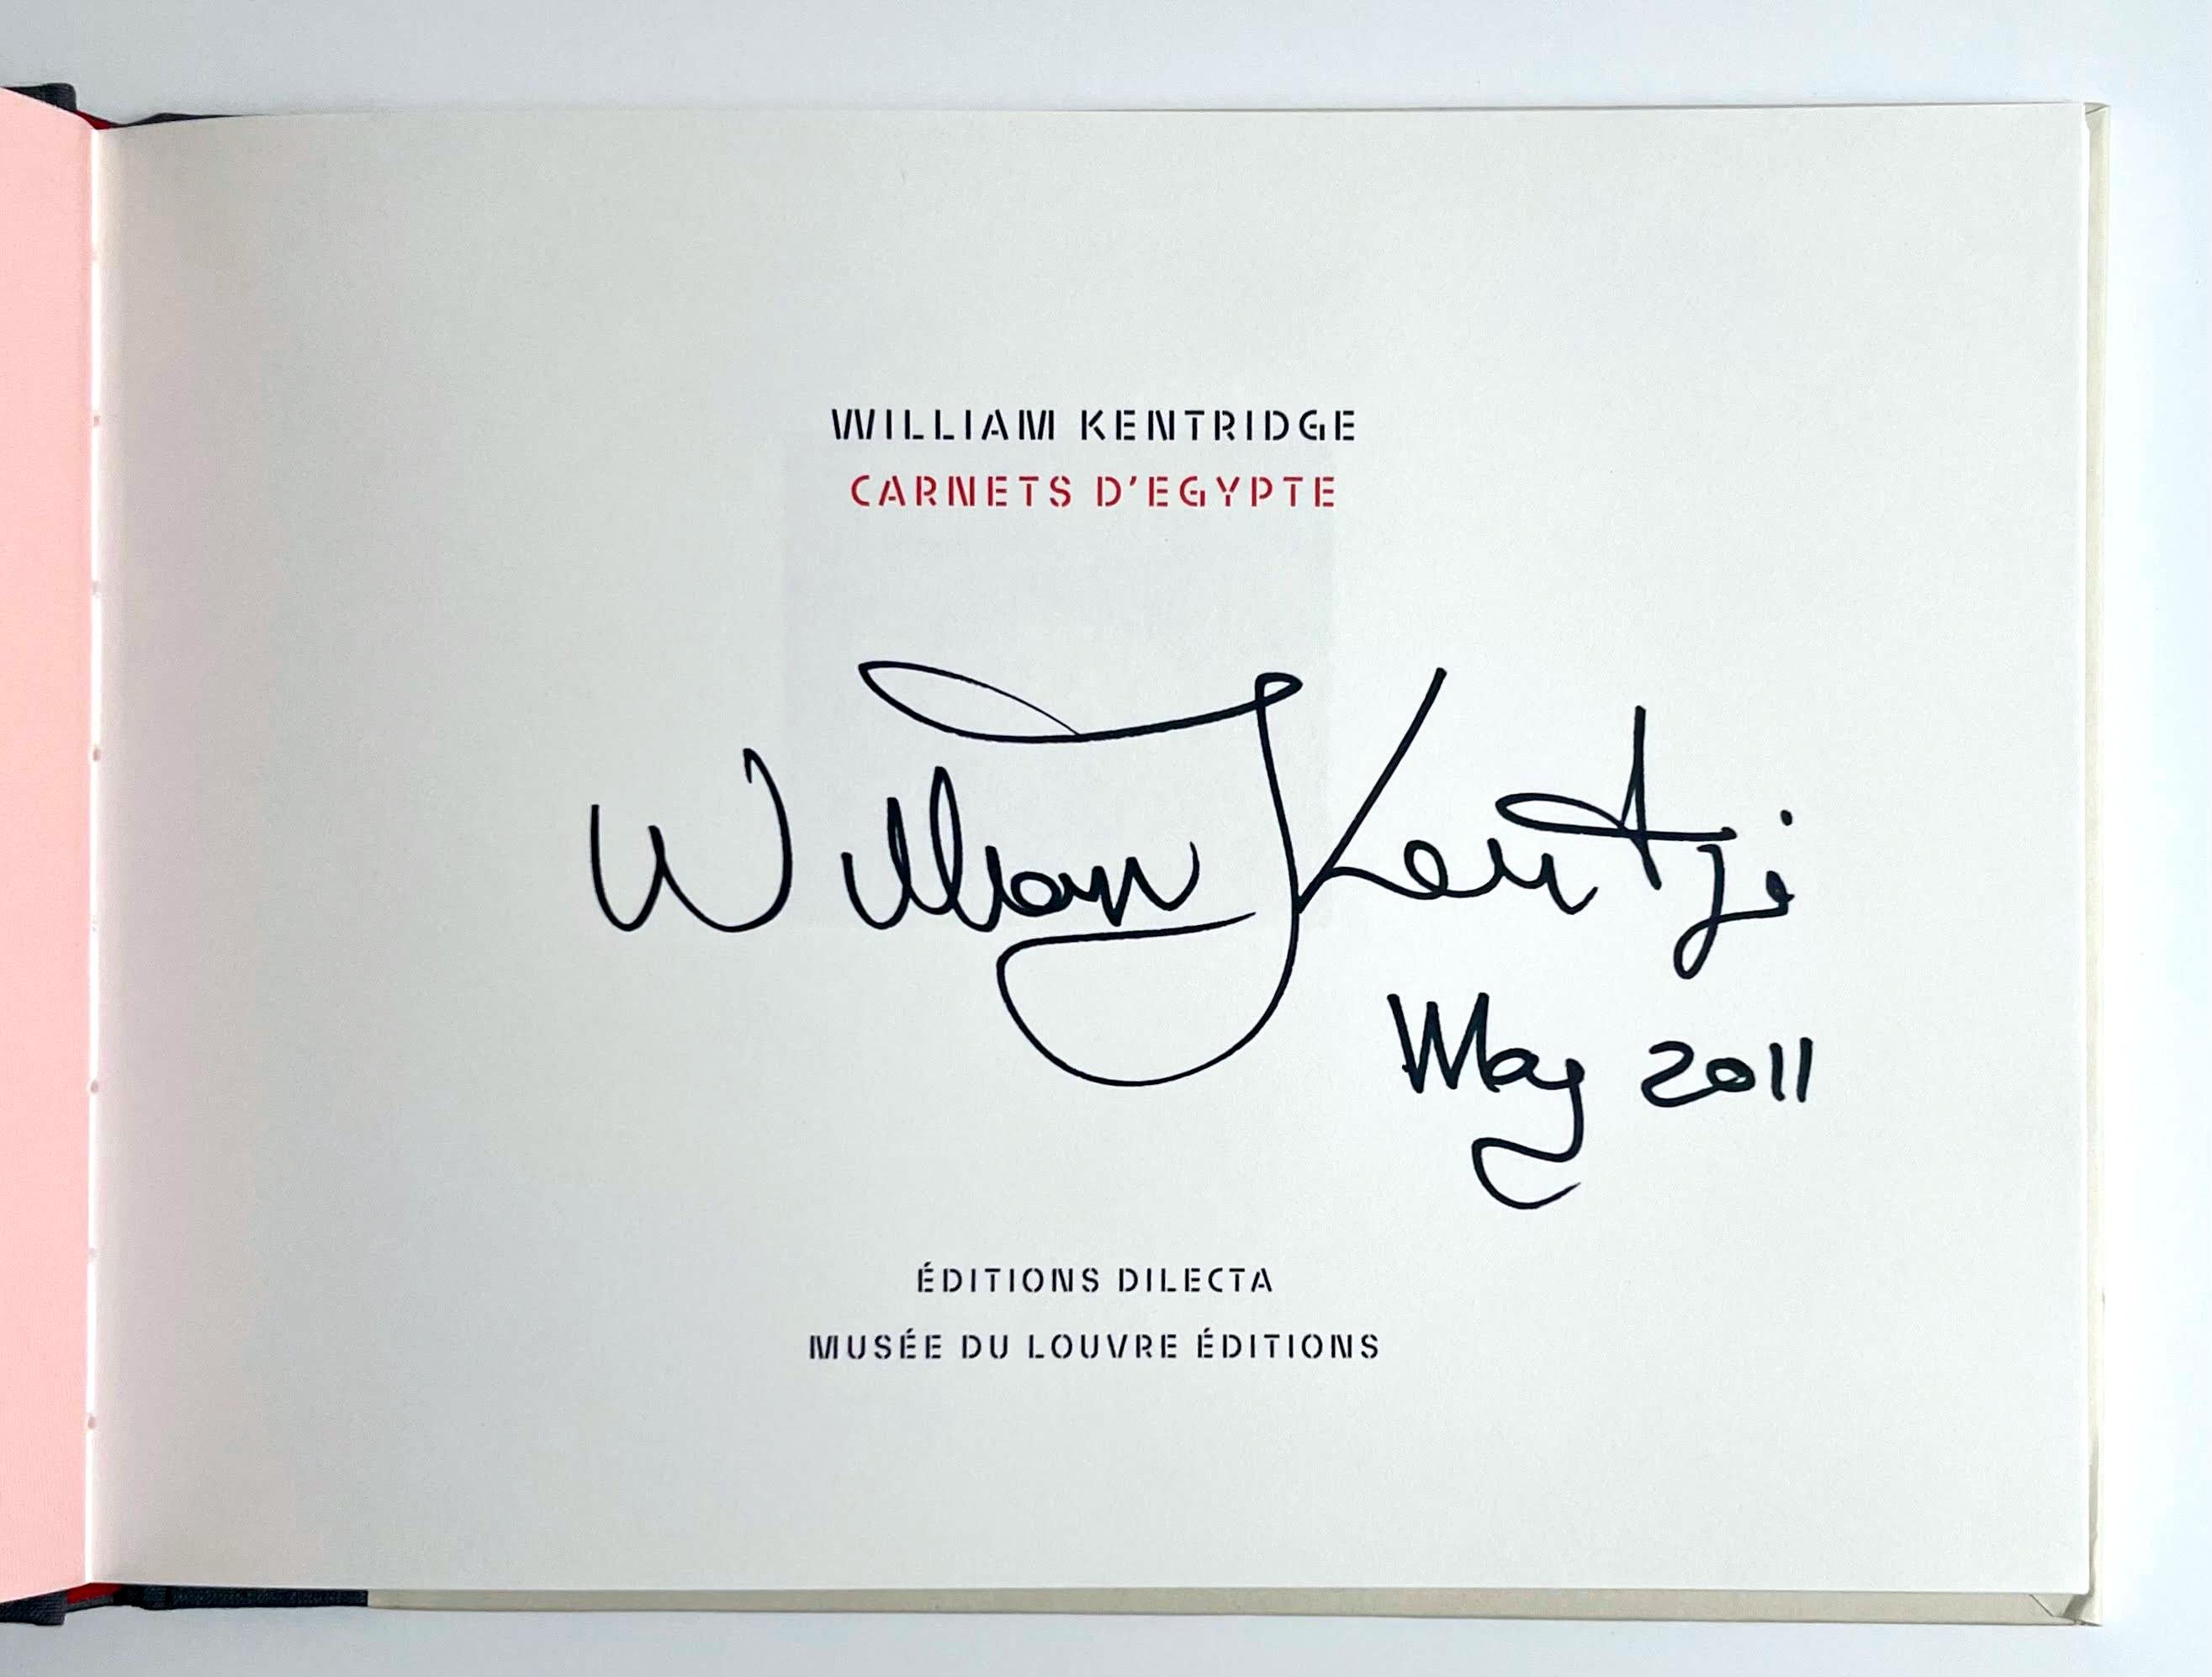 Carnets D'Egypte (hand signed and dated by William Kentridge) For Sale 2